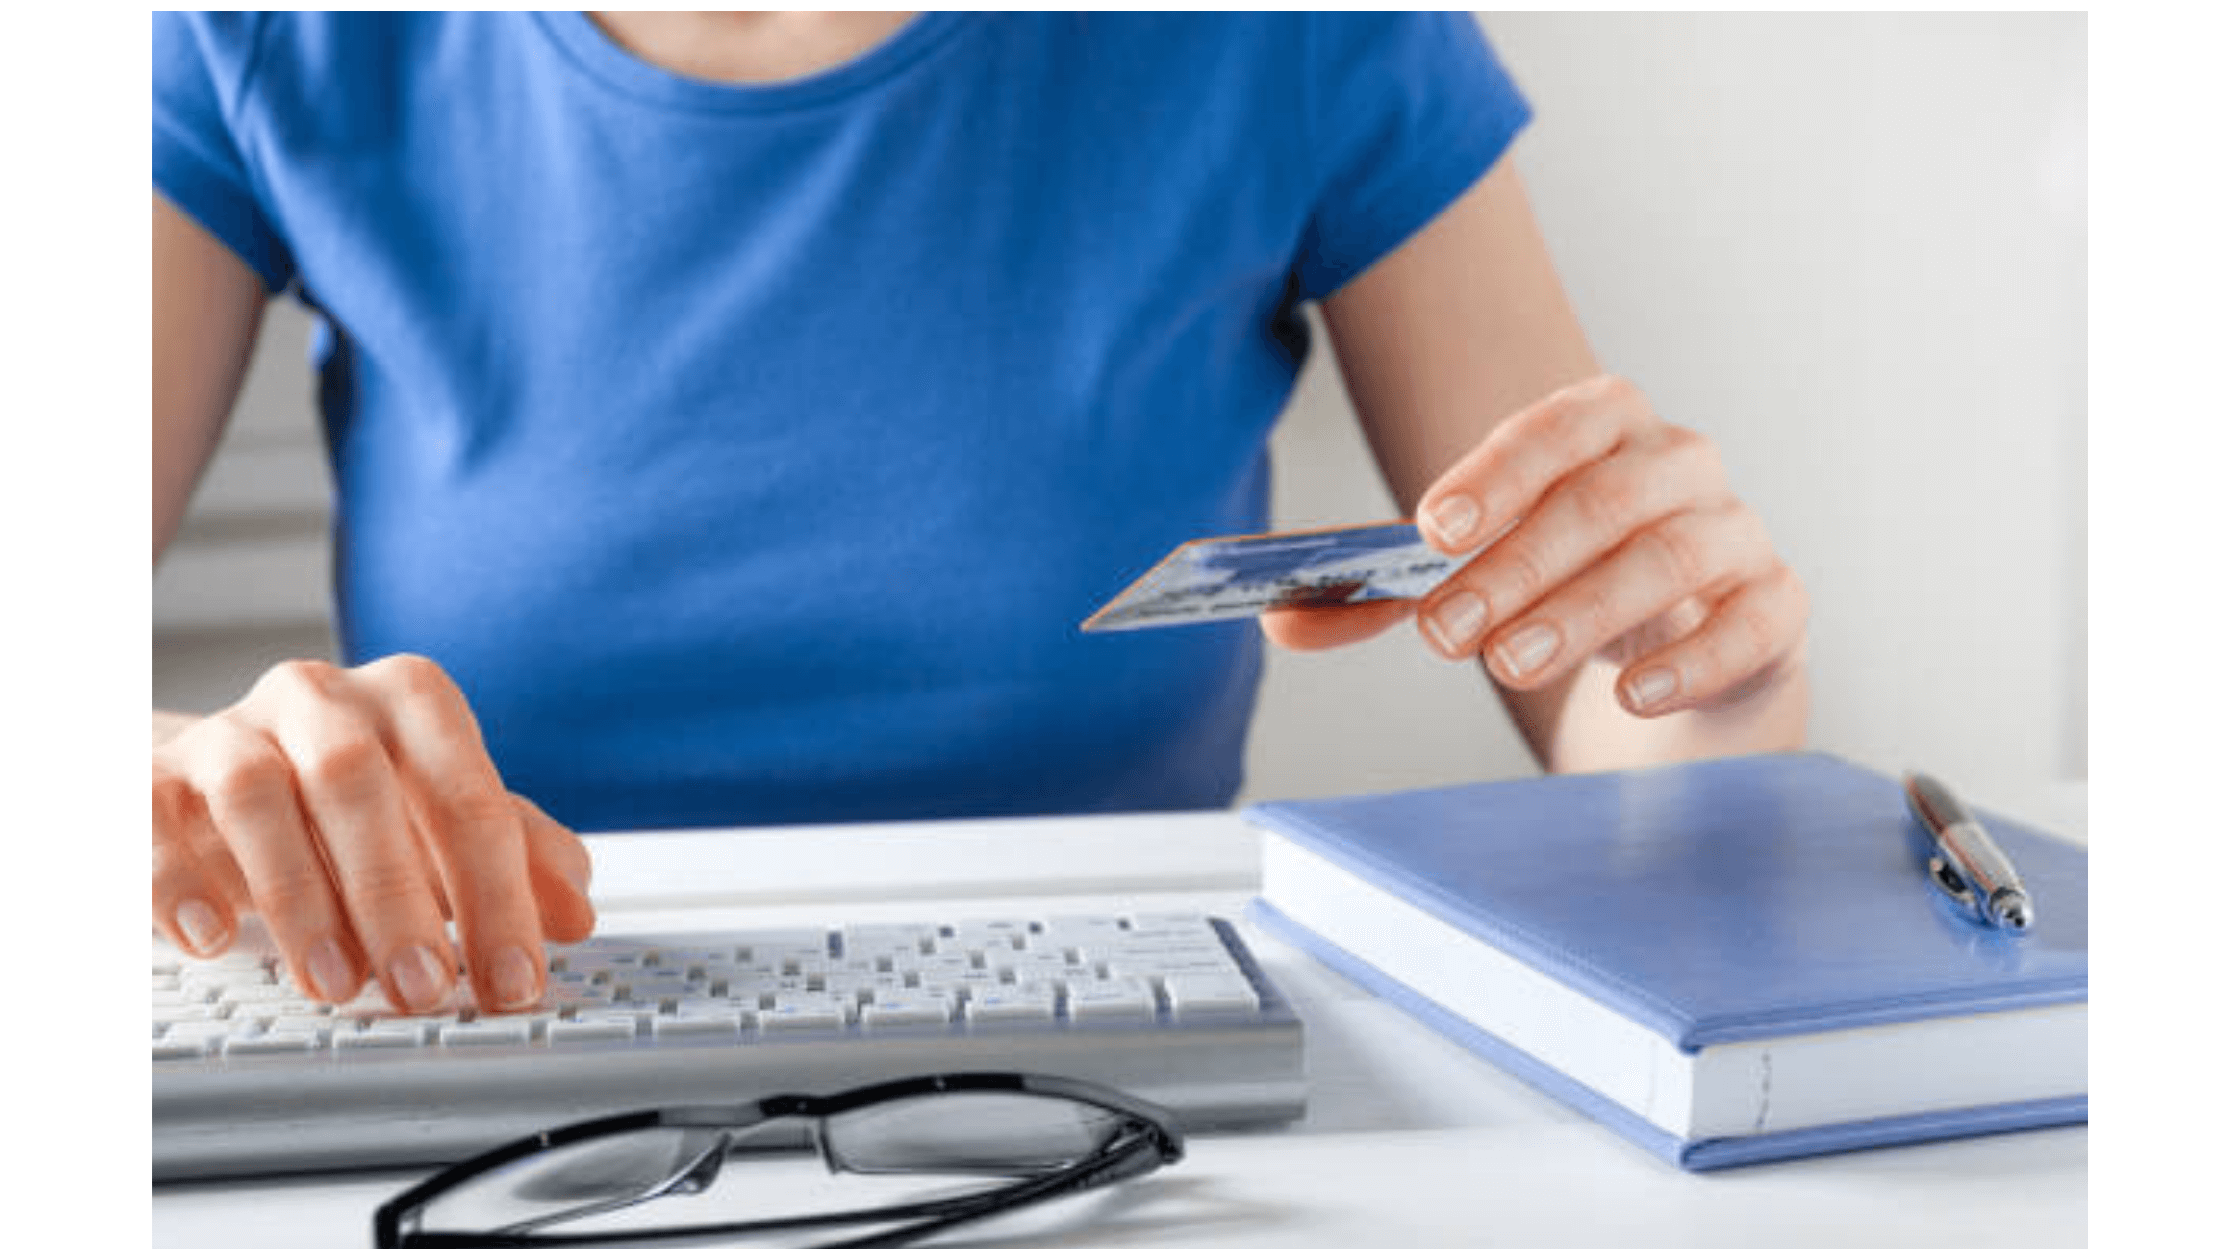 eCommerce As A Growing Career Industry